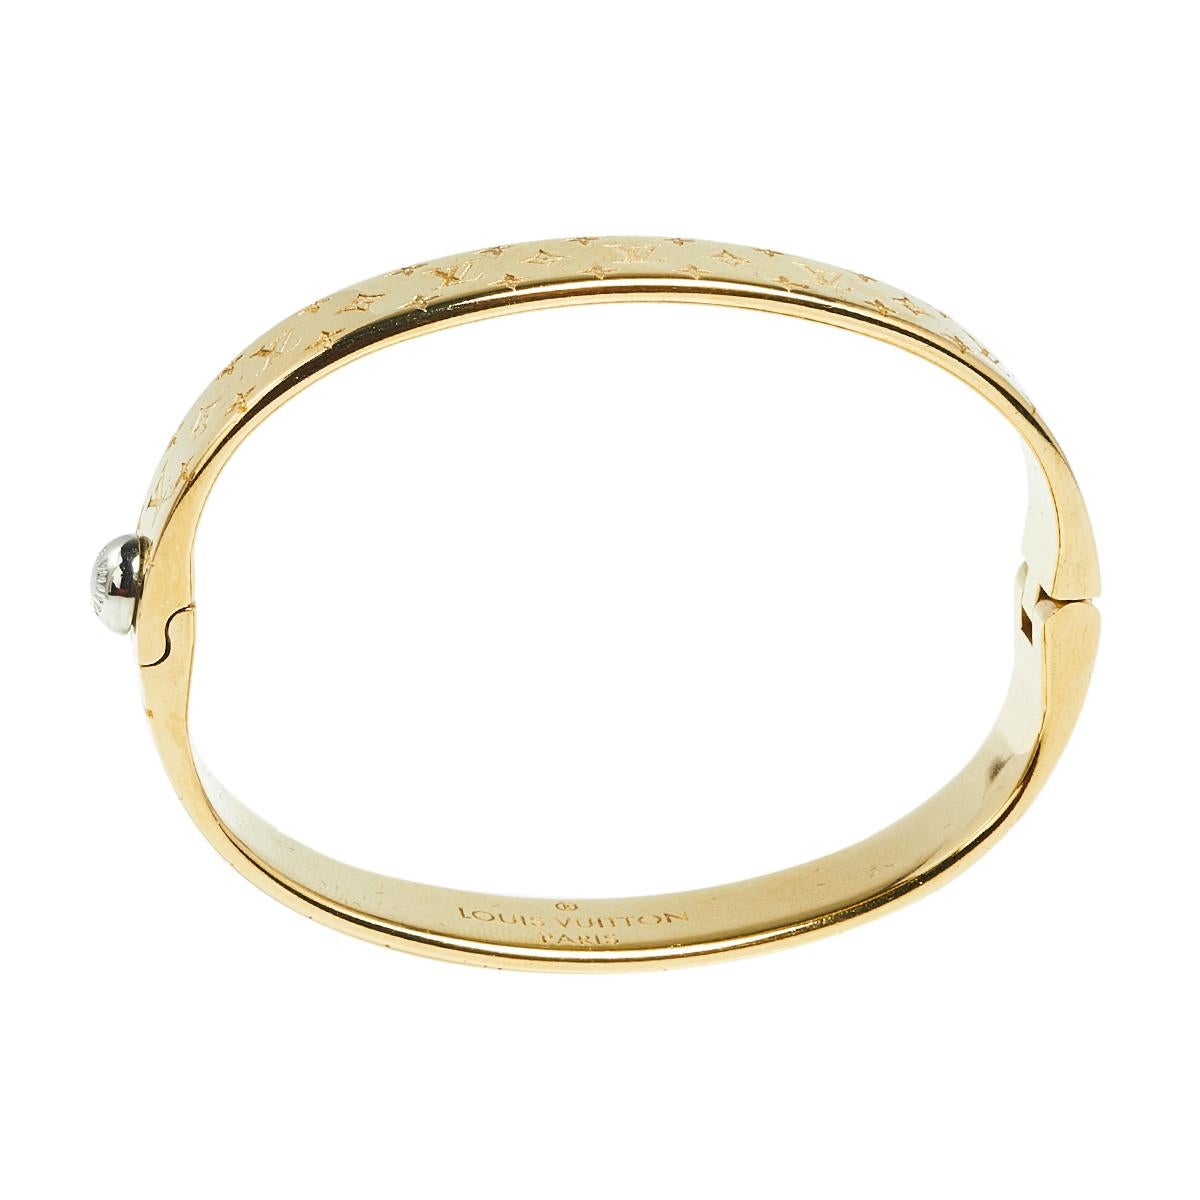 Bound to sit around your wrist and exude beauty, this Louis Vuitton is a great buy. It is made from metal and engraved with the brand's signature monogram — a pattern well-known and loved by fashion lovers around the world. The bracelet has a smooth